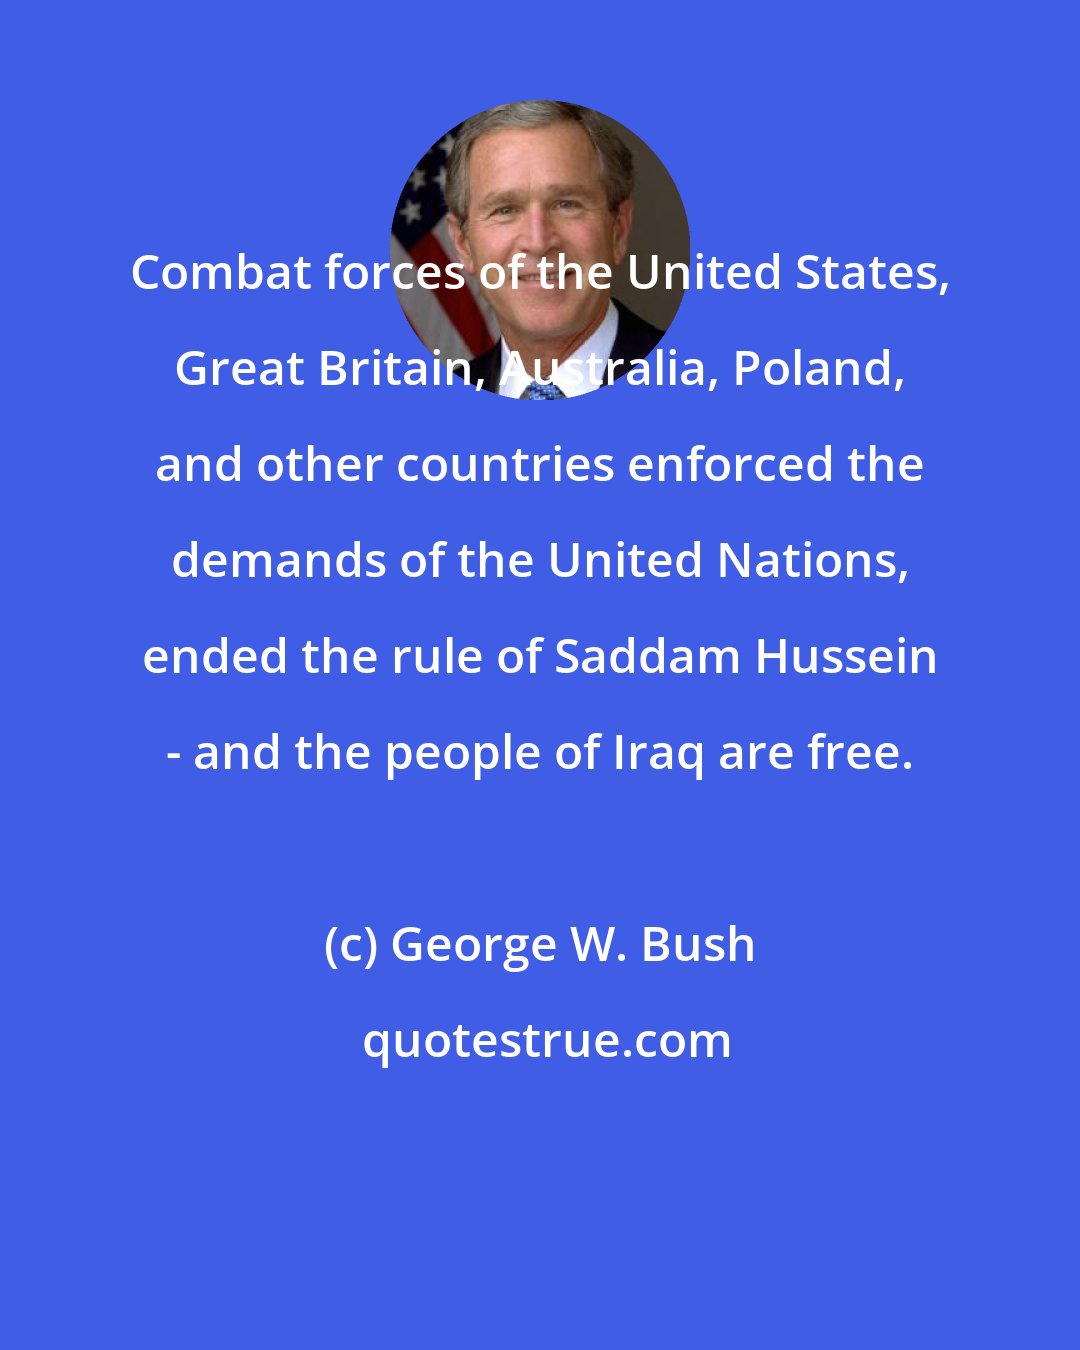 George W. Bush: Combat forces of the United States, Great Britain, Australia, Poland, and other countries enforced the demands of the United Nations, ended the rule of Saddam Hussein - and the people of Iraq are free.